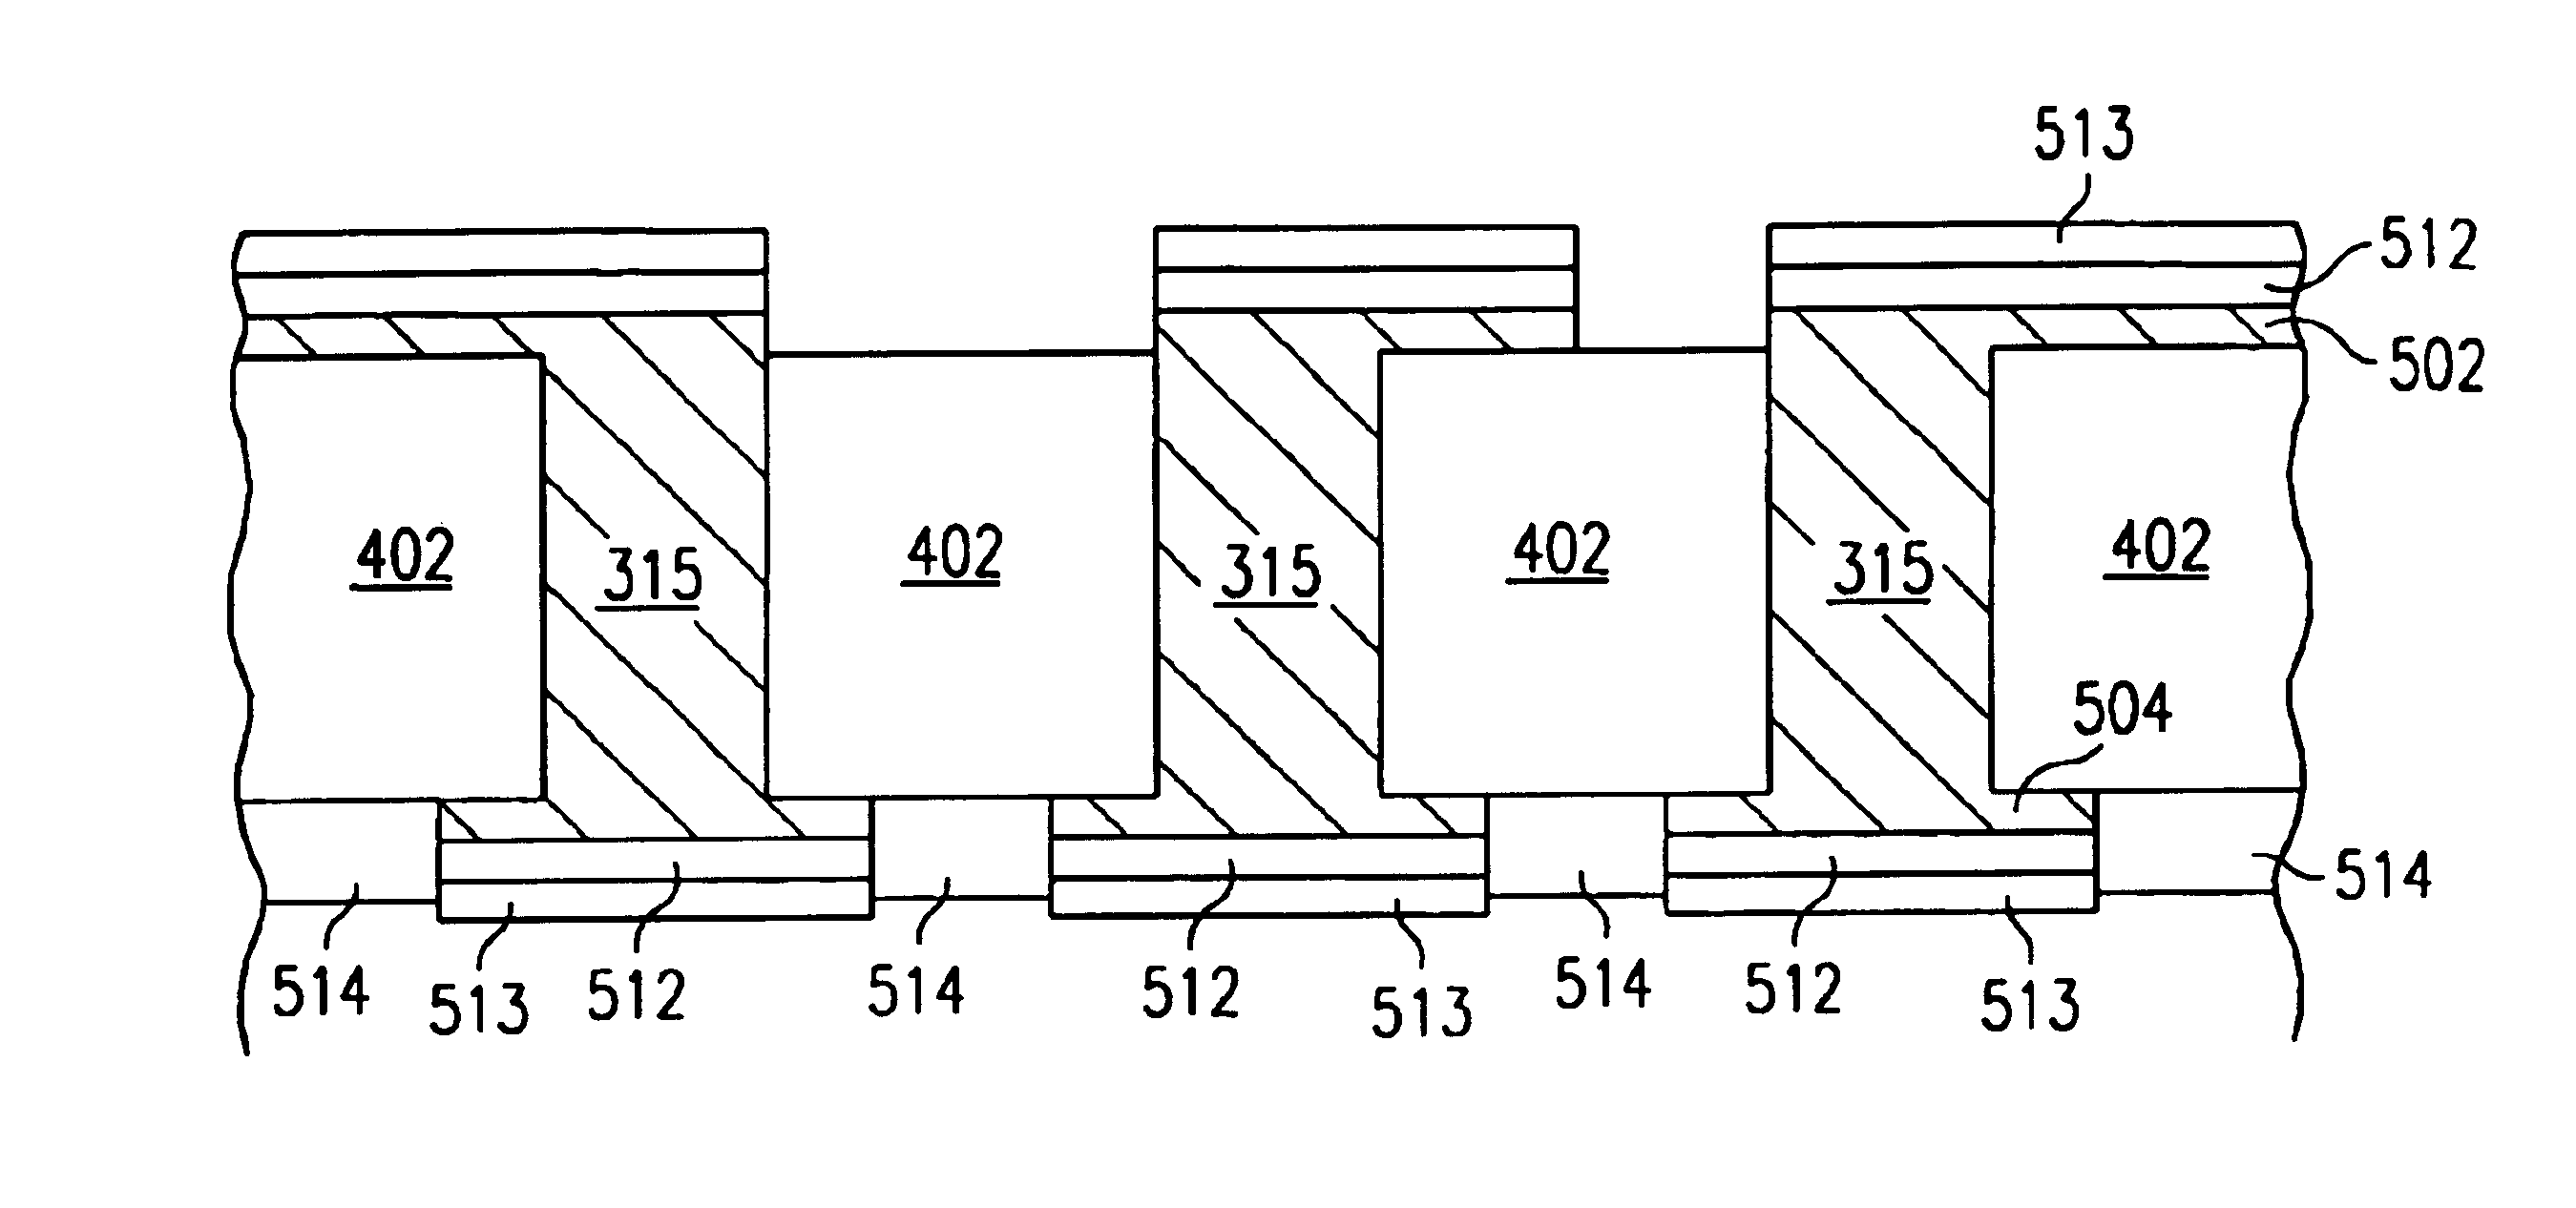 Method of fabricating flexible circuits for integrated circuit interconnections